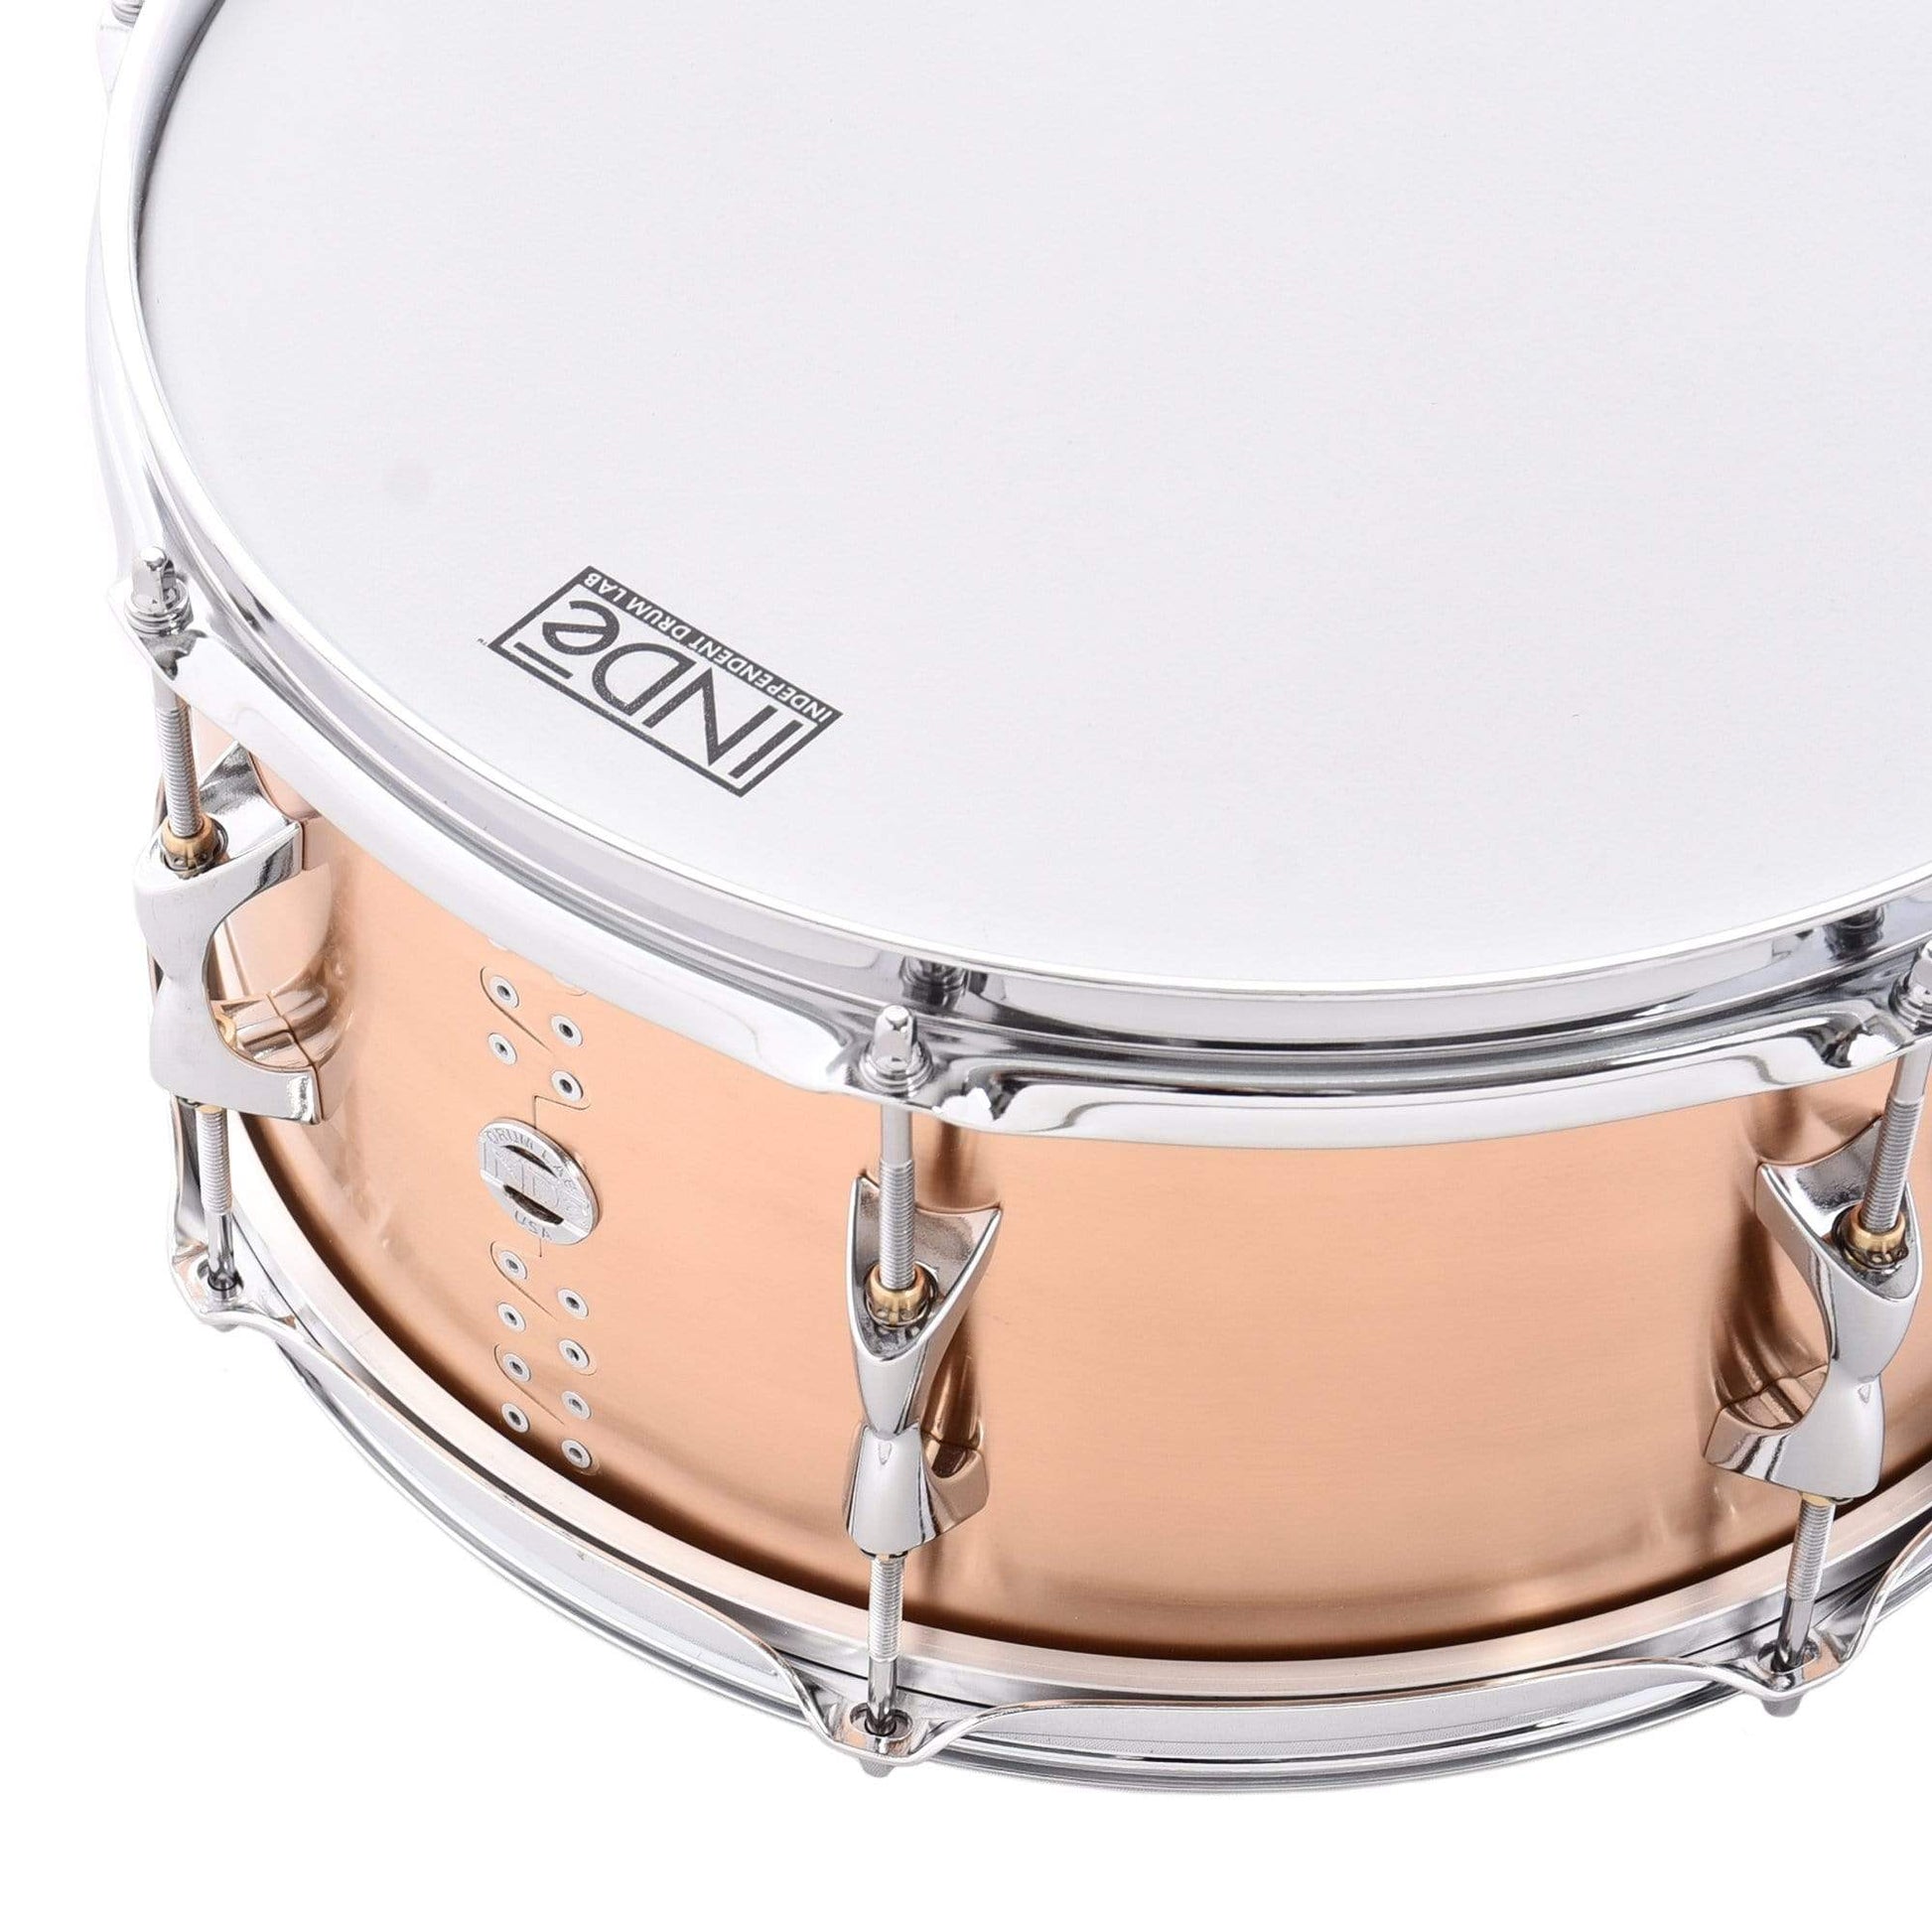 INDe Drum Lab 6.5x14 Kalamazoo Series Bronze Snare Drum Drums and Percussion / Acoustic Drums / Snare